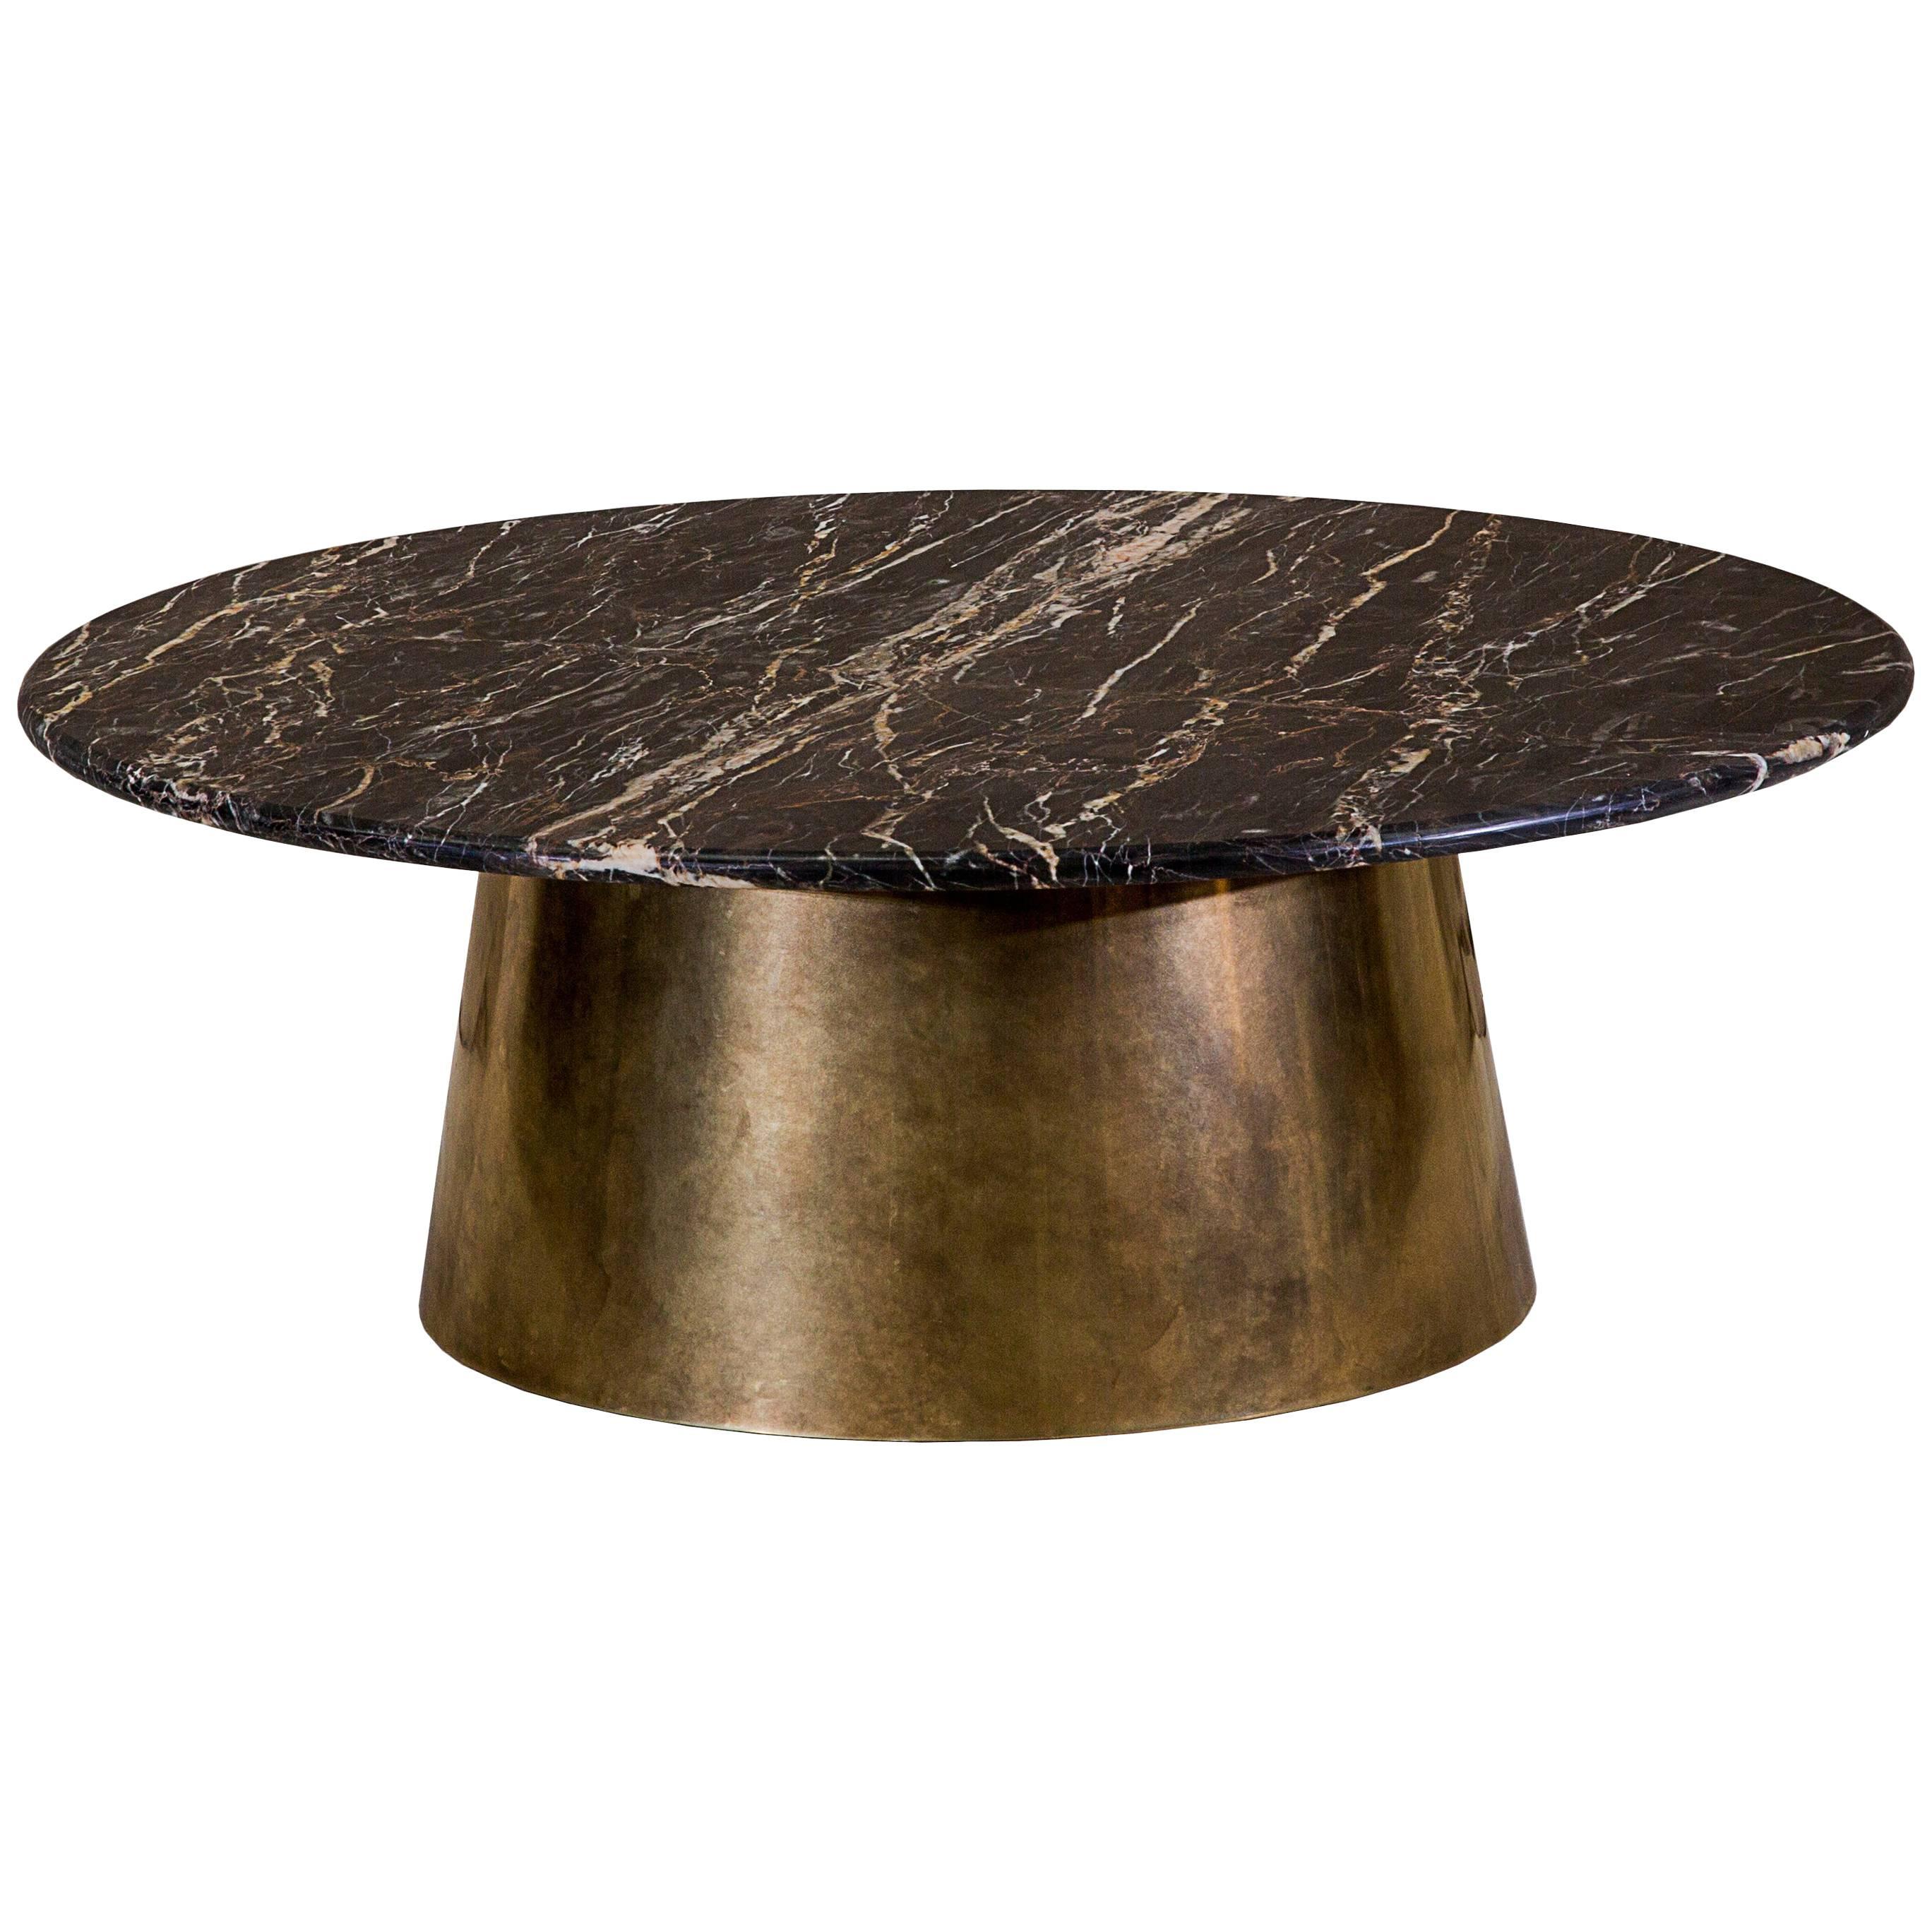 Stanhope Coffee Table, Large, Circular Brass Base, Rare British Marble Top For Sale